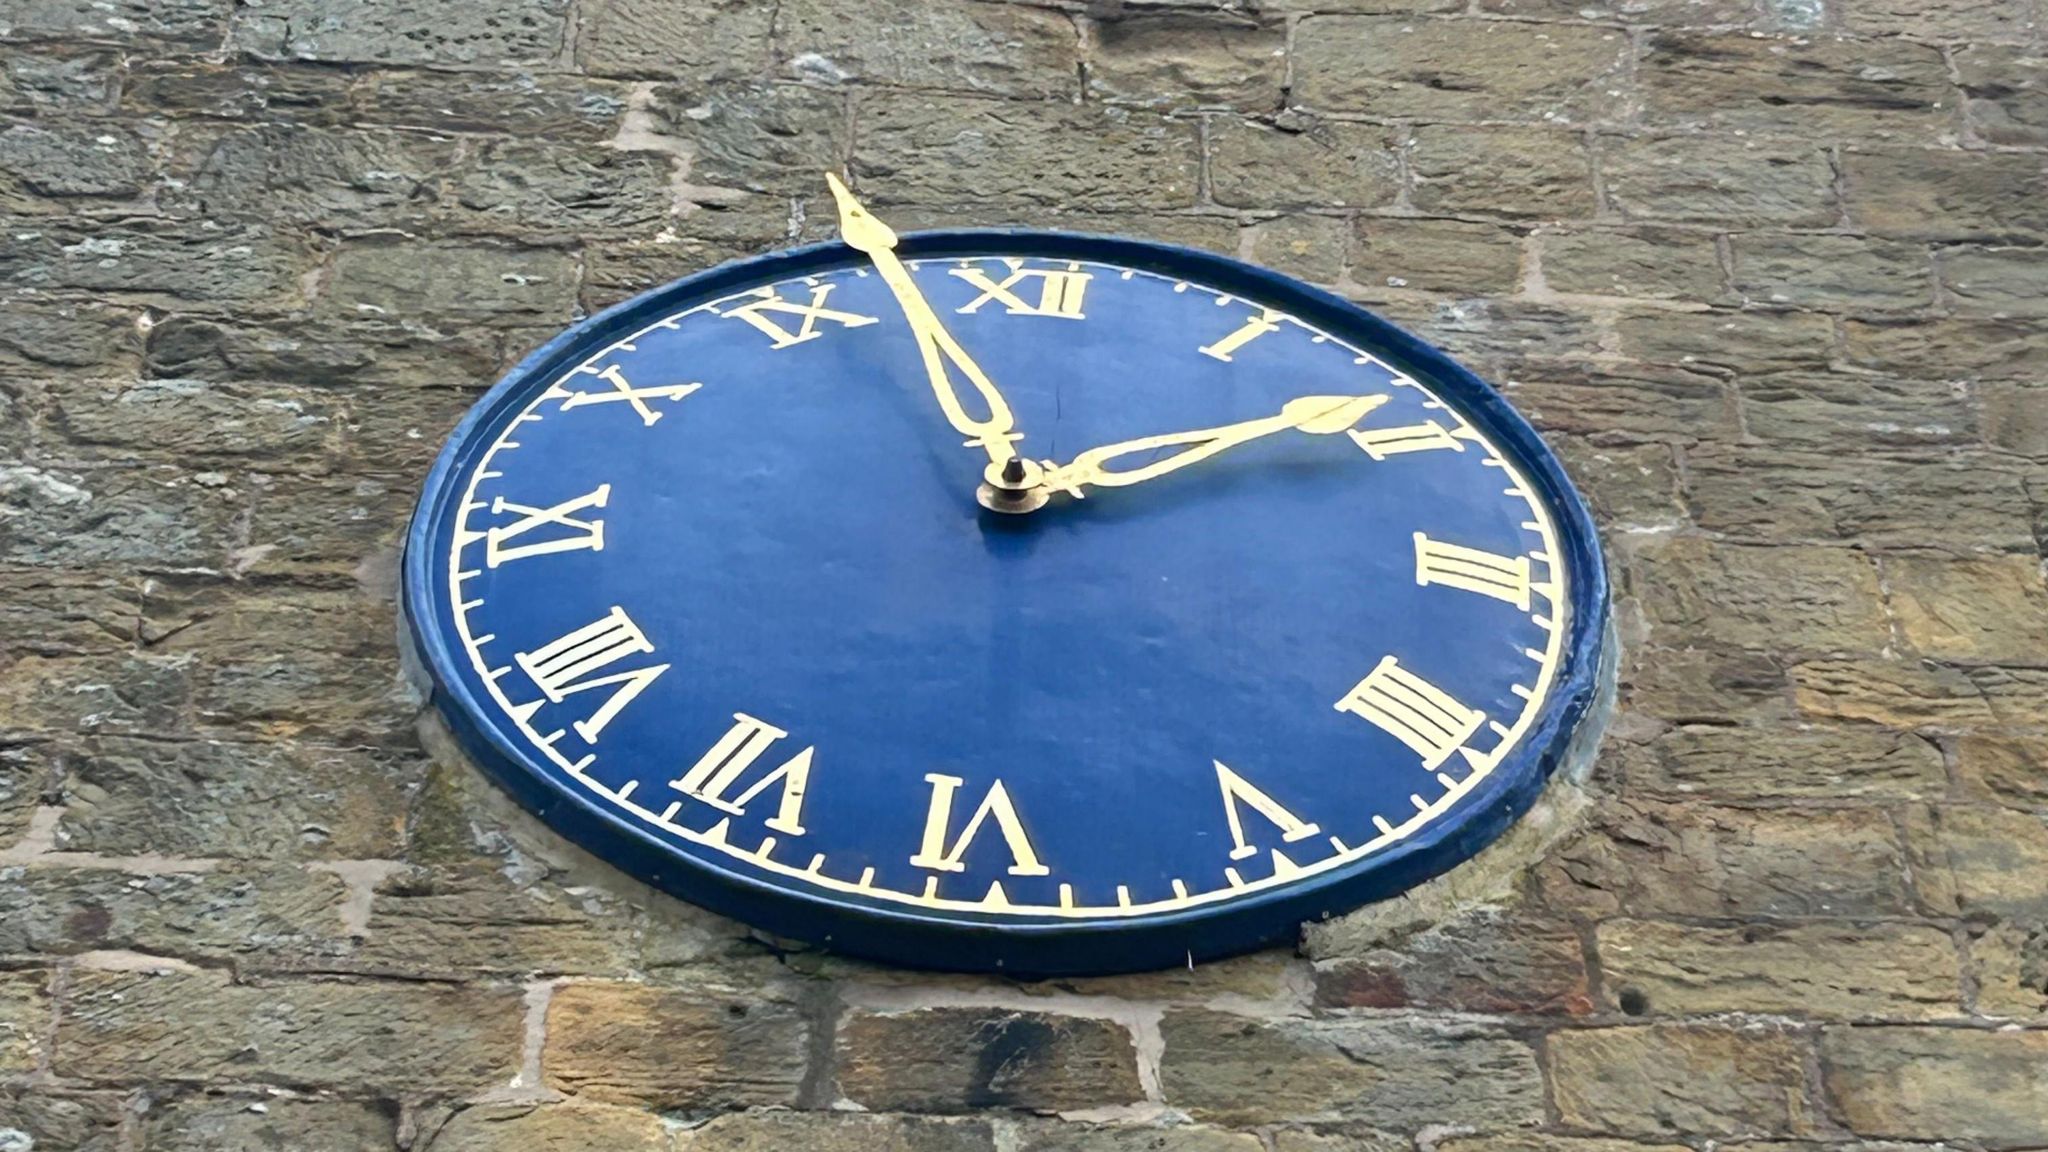 Close-up of a blue clock on a church. The time shows that it is a few minutes to two o'clock. The roman numeral for 11 is incorrect, with the numeral for nine in its place.